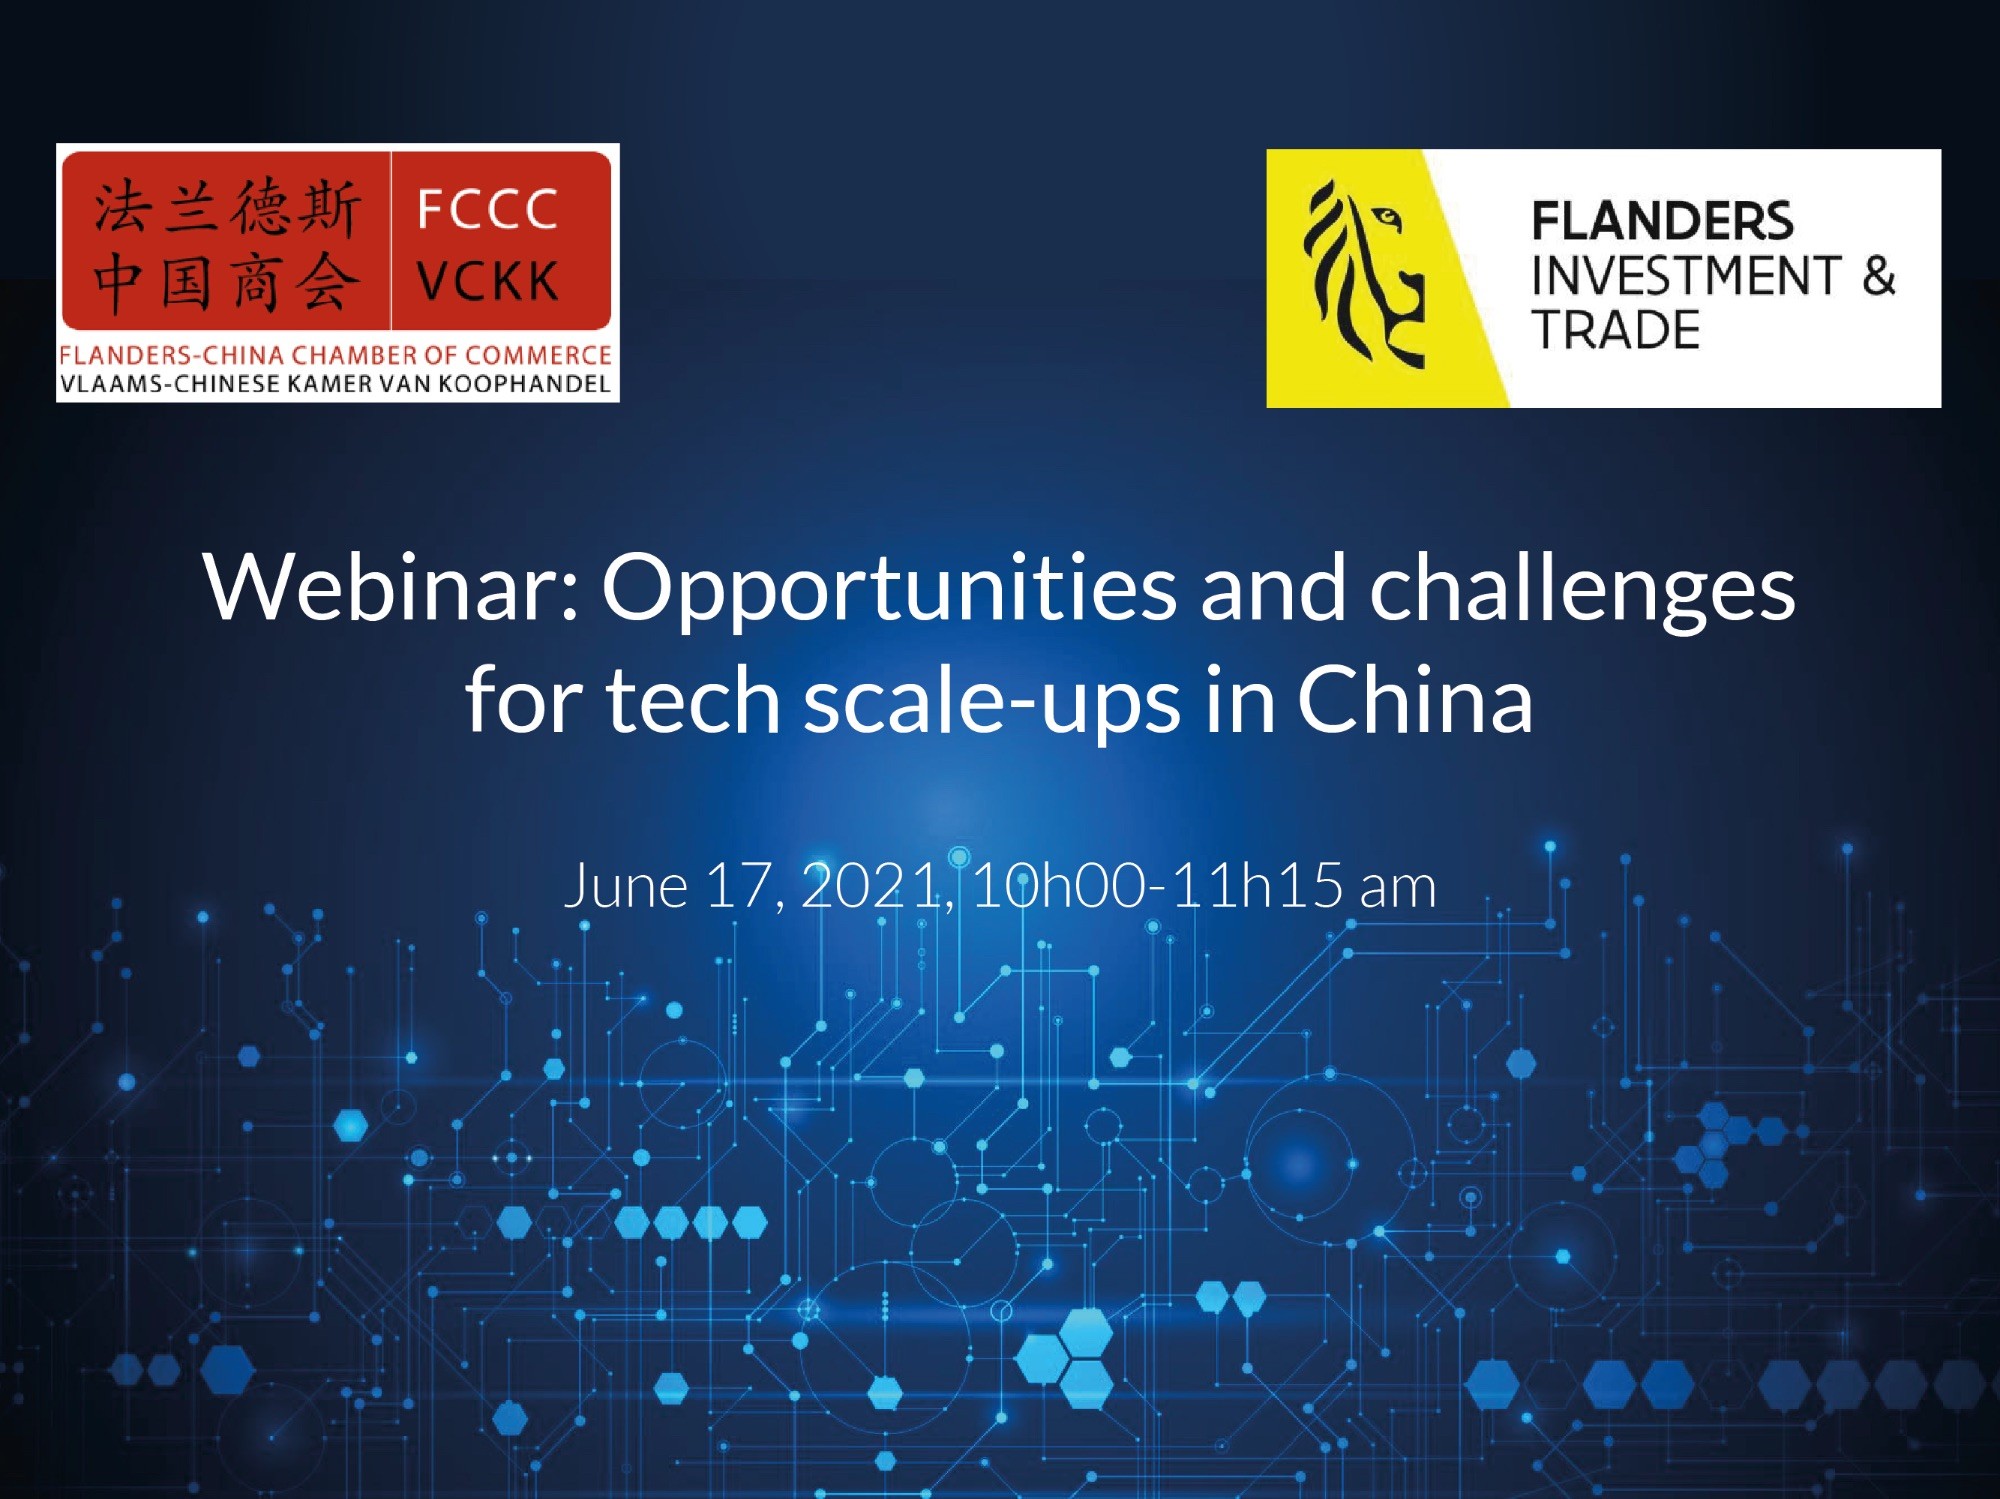 Webinar: “Opportunities and challenges for tech scale-ups in China” 17 June 2021, 10:00 am – 11:15 am